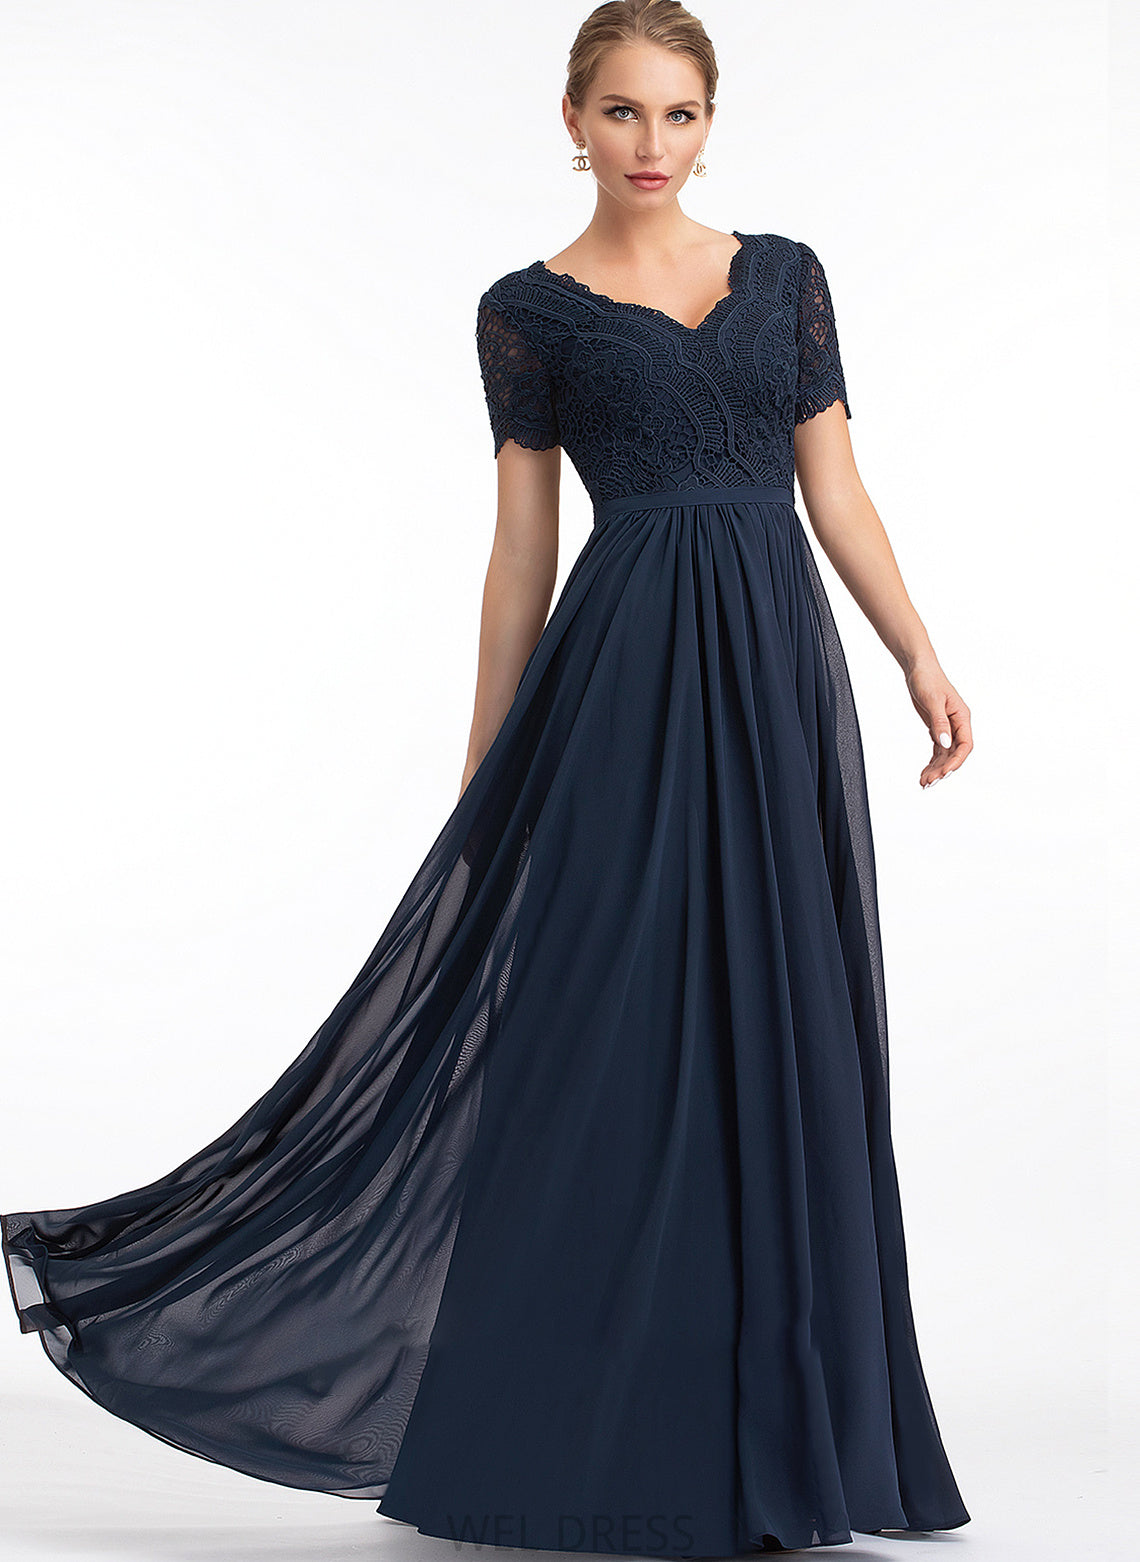 V-neck Fabric Neckline Lace Silhouette A-Line Floor-Length Length Sleeve Penelope Scoop High Low